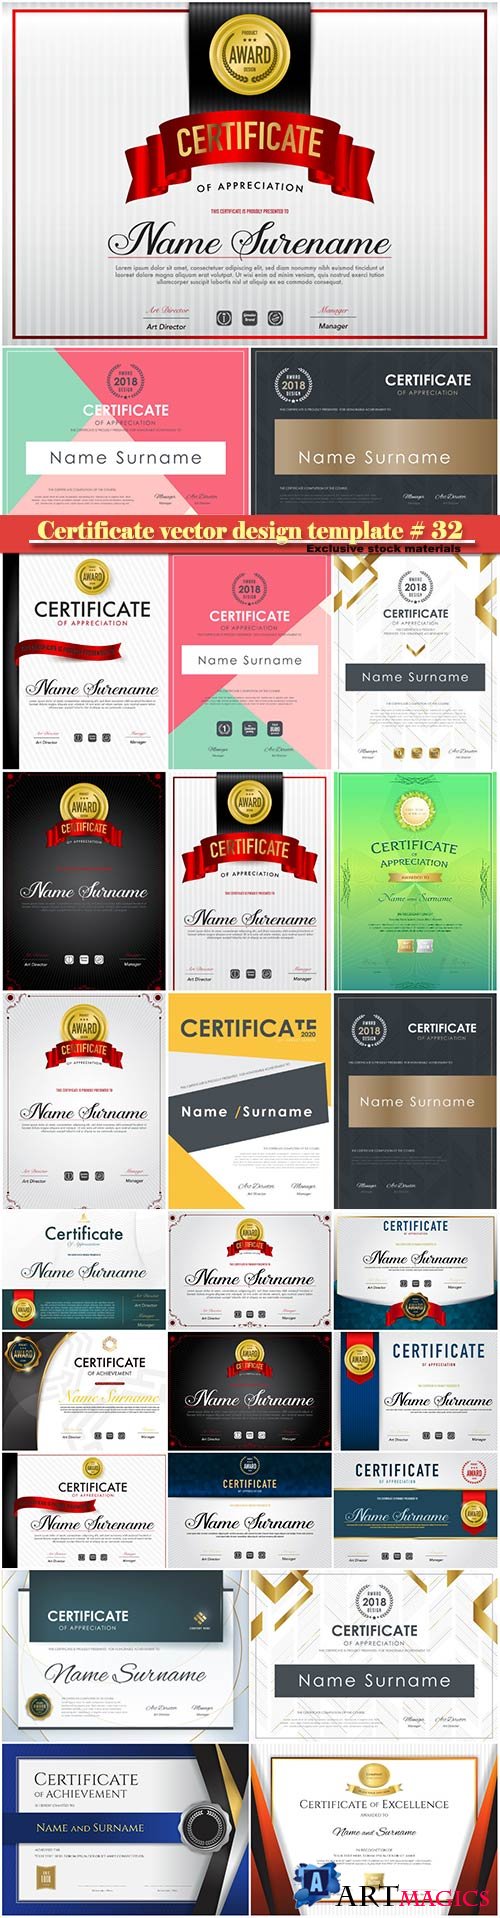 Certificate and vector diploma design template # 32